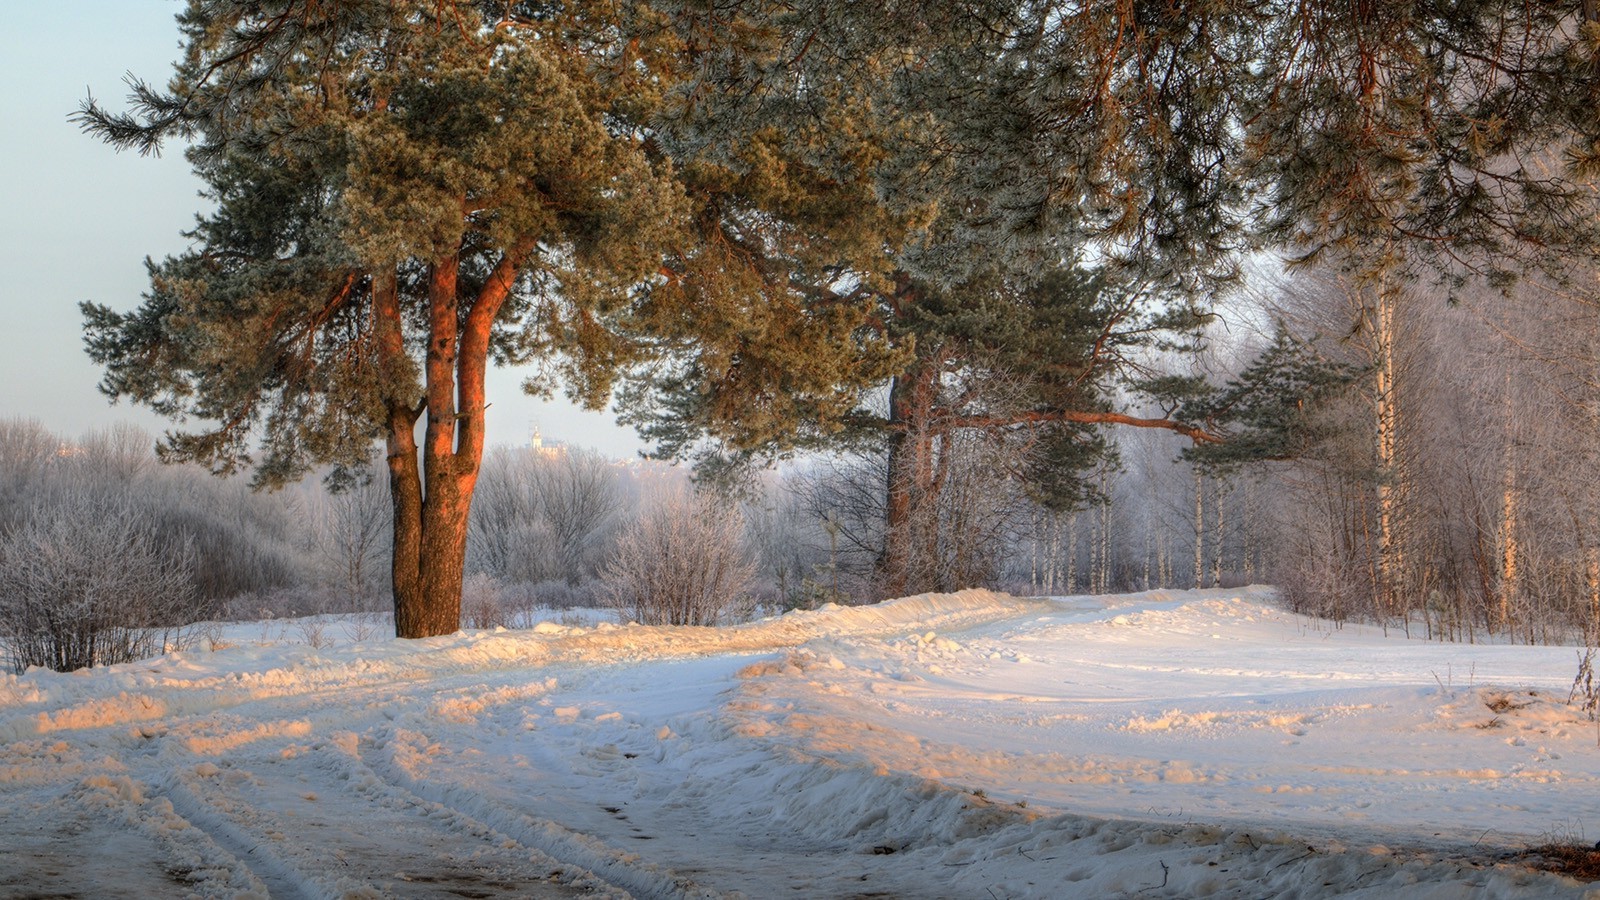 landscape, Photography, Nature, Morning, Road, Trees, Snow, Winter, Shrubs, Sunlight, Russia Wallpaper